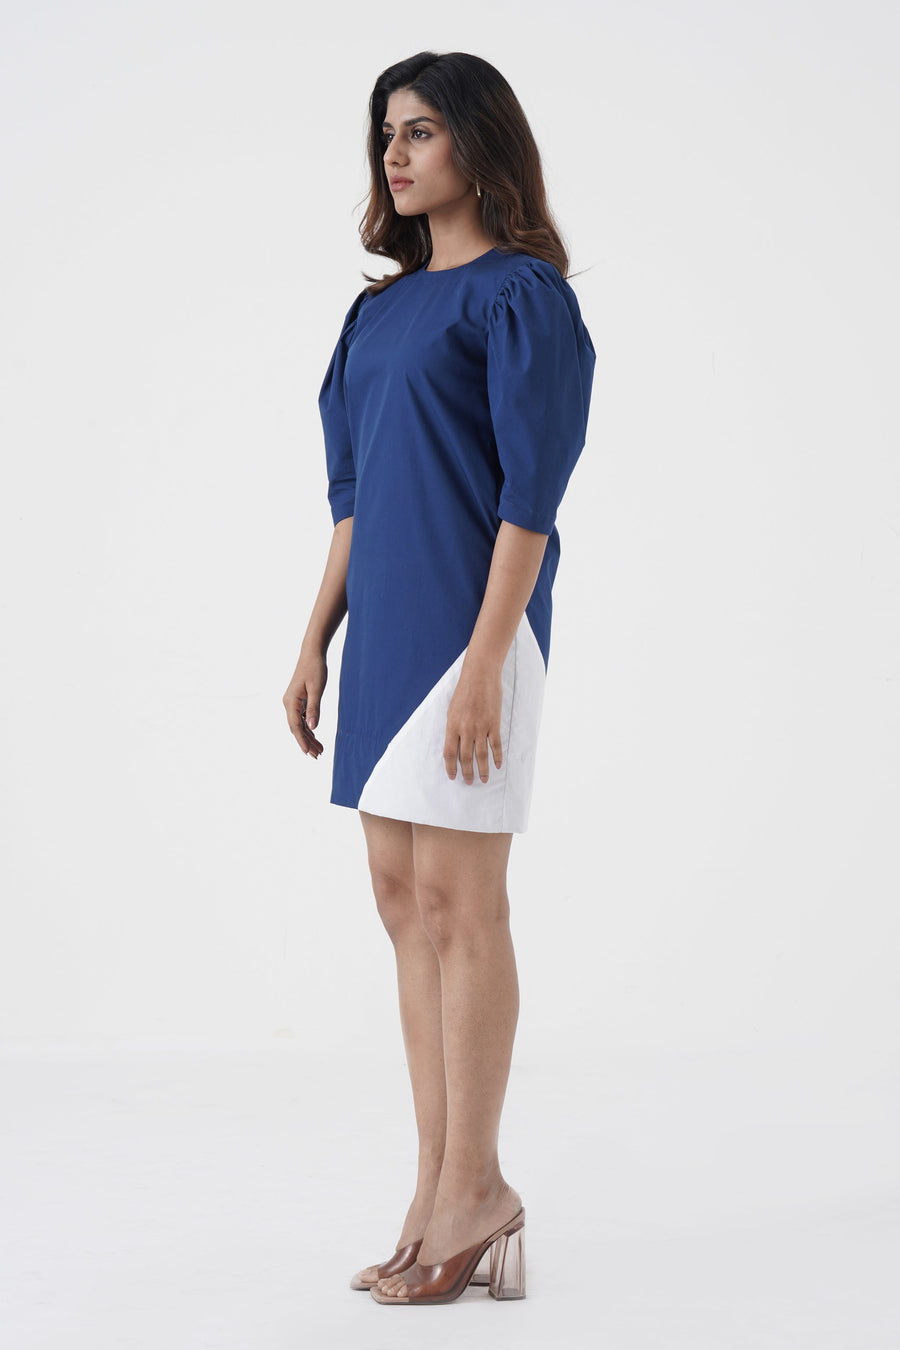 A Model Wearing Blue Pure Cotton Amour Propre - Cowl sleeves chic dress - Blue, curated by Only Ethikal